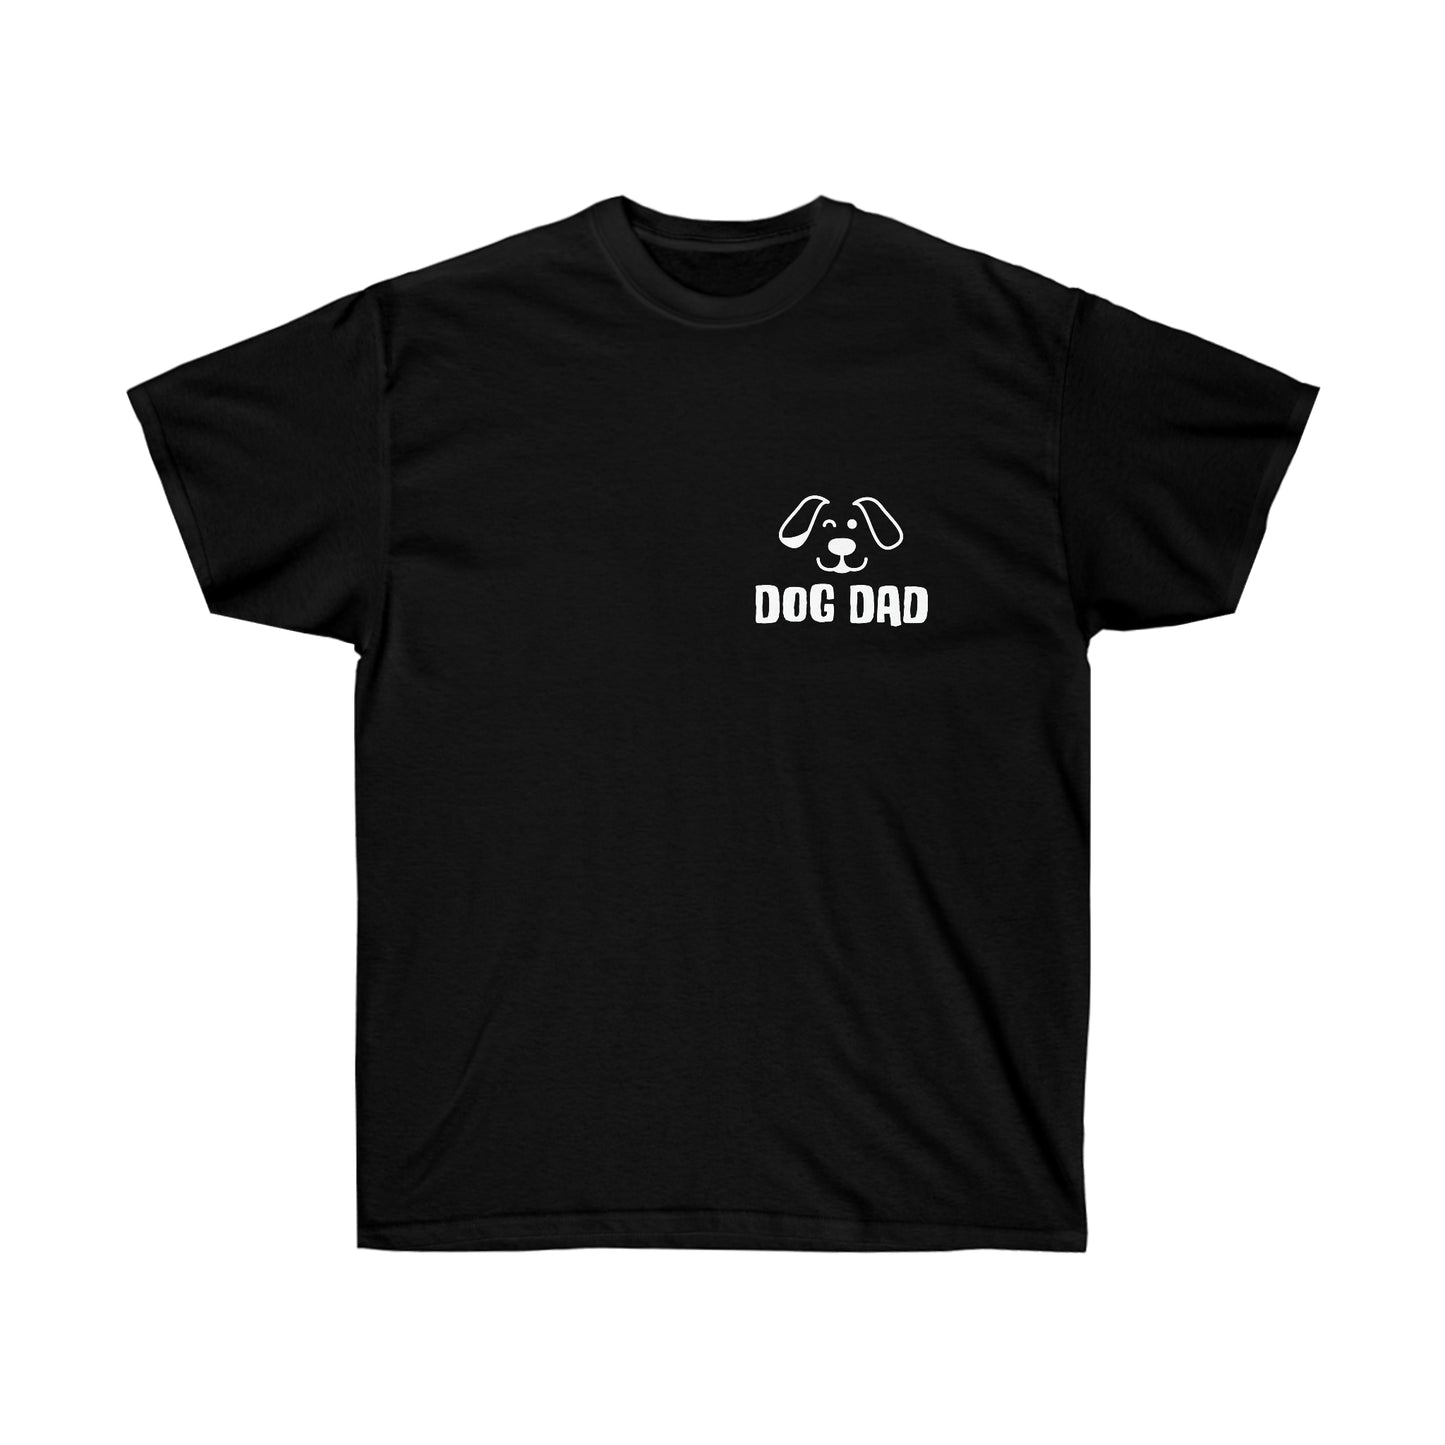 Dog Dad T-Shirt - Cool and Committed Tee for Dog Enthusiasts - Gift for Dog Dads Unisex